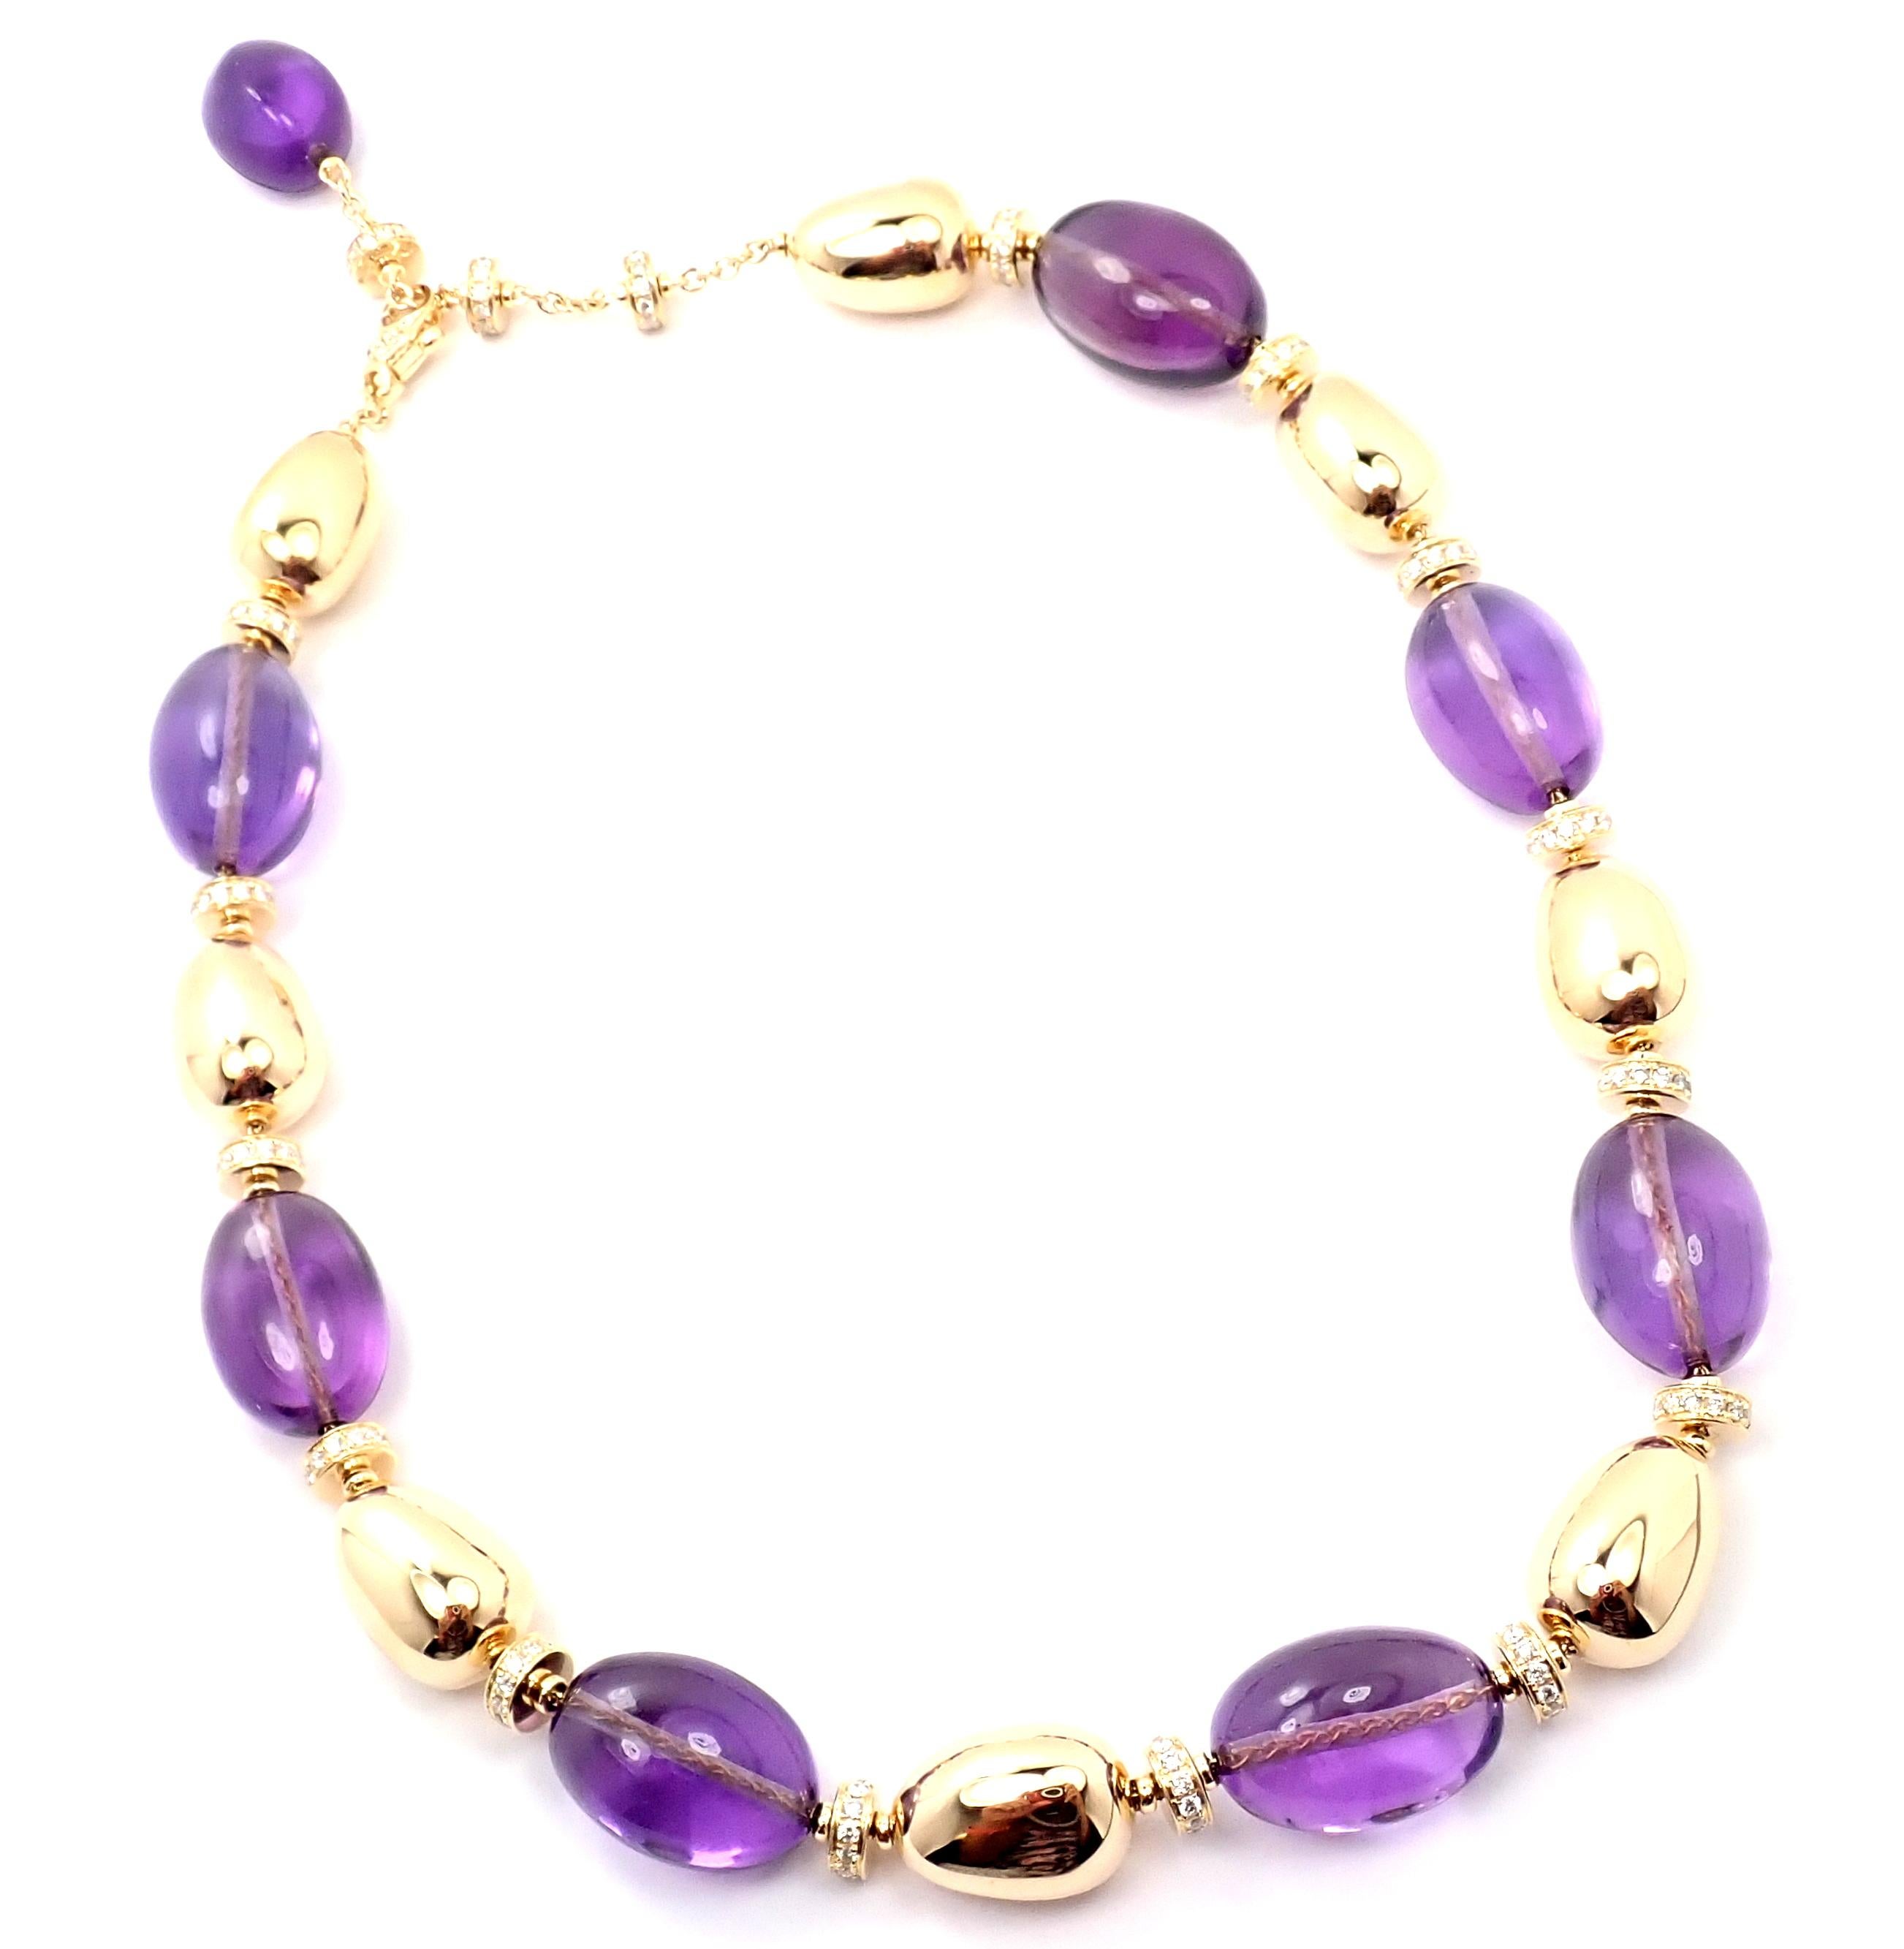 18k Yellow Gold Mediterranean Eden Diamond Amethyst Necklace by Bulgari.
With 214 Round brilliant cut diamonds VS1 clarity, E color total weight approximately 3.51ct
8 large amethysts 23mm x 15mm
Details:
Length: 15.80-18.30